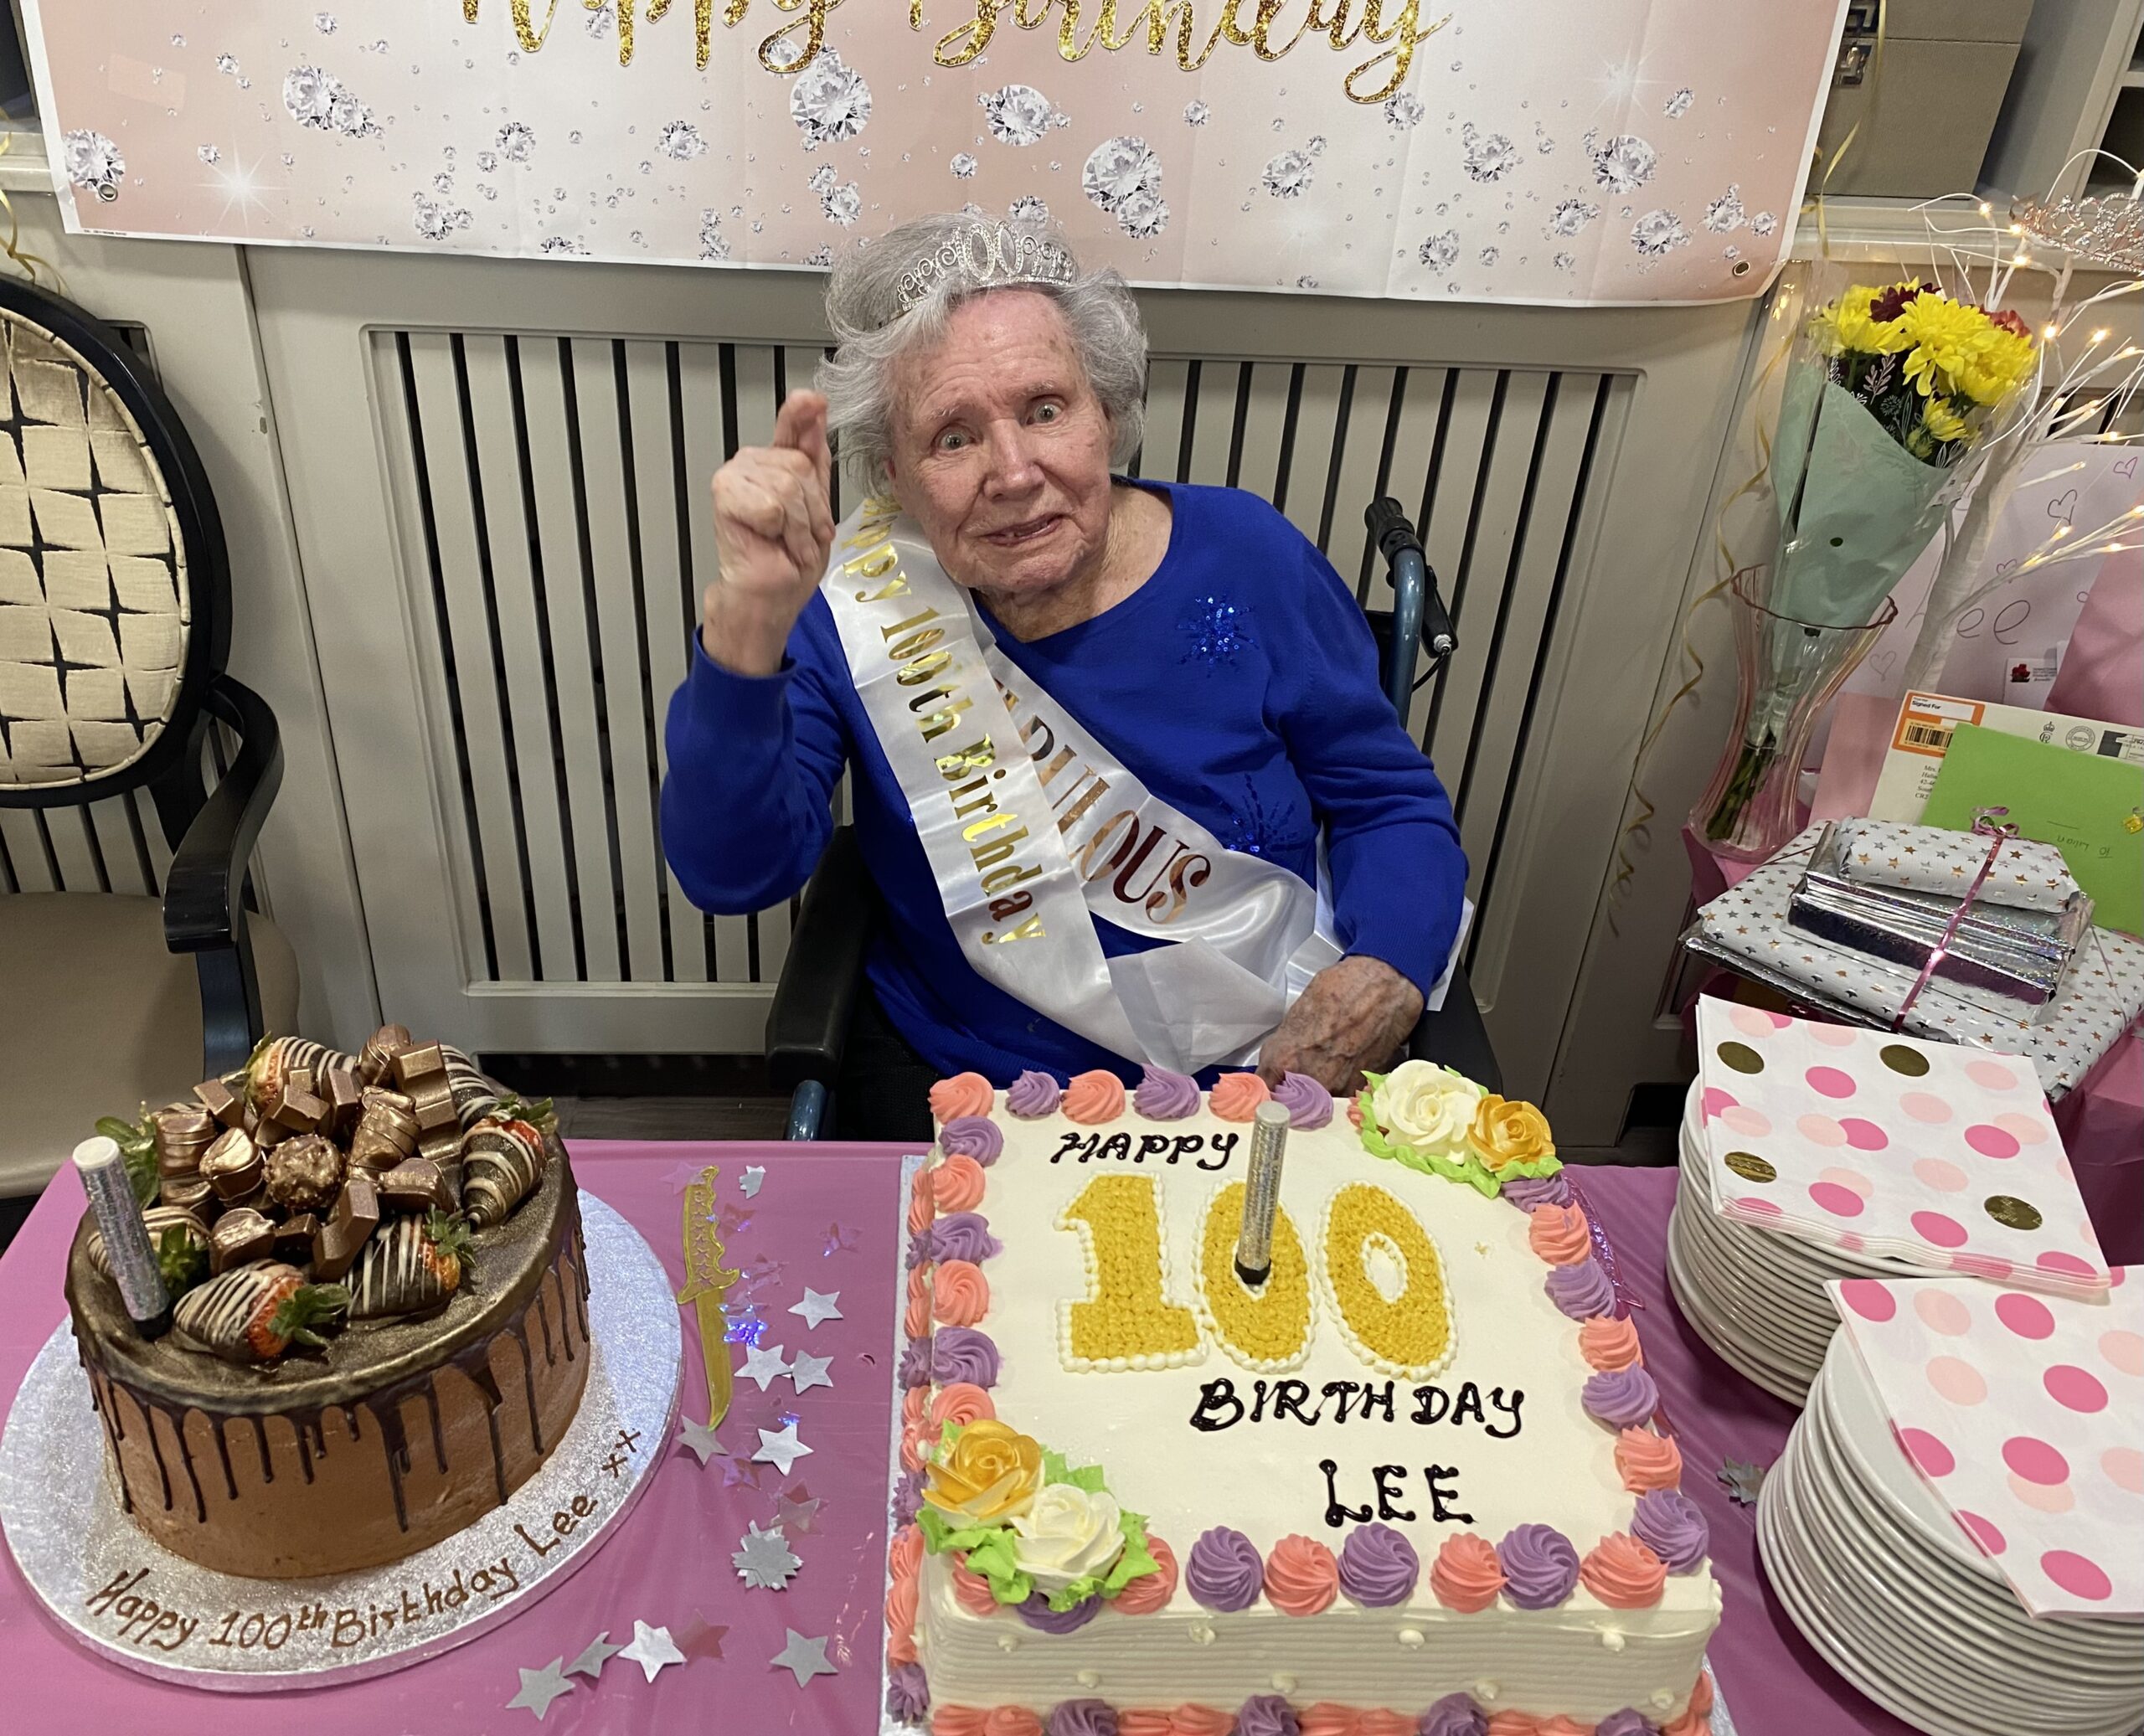 One of our residents celebrating their 100th birthday at Haling Park Care Home